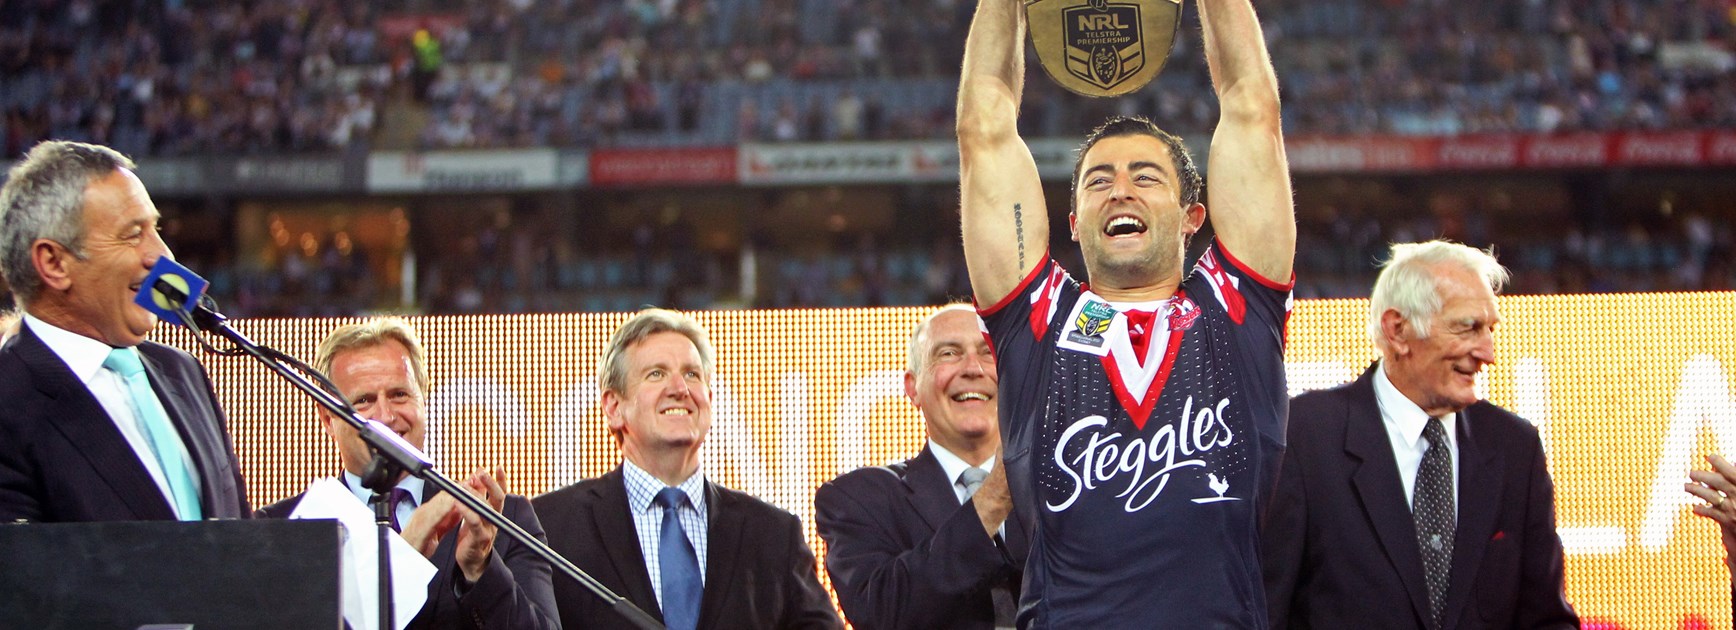 Roosters skipper Anthony Minichiello raises the premiership trophy in 2013.